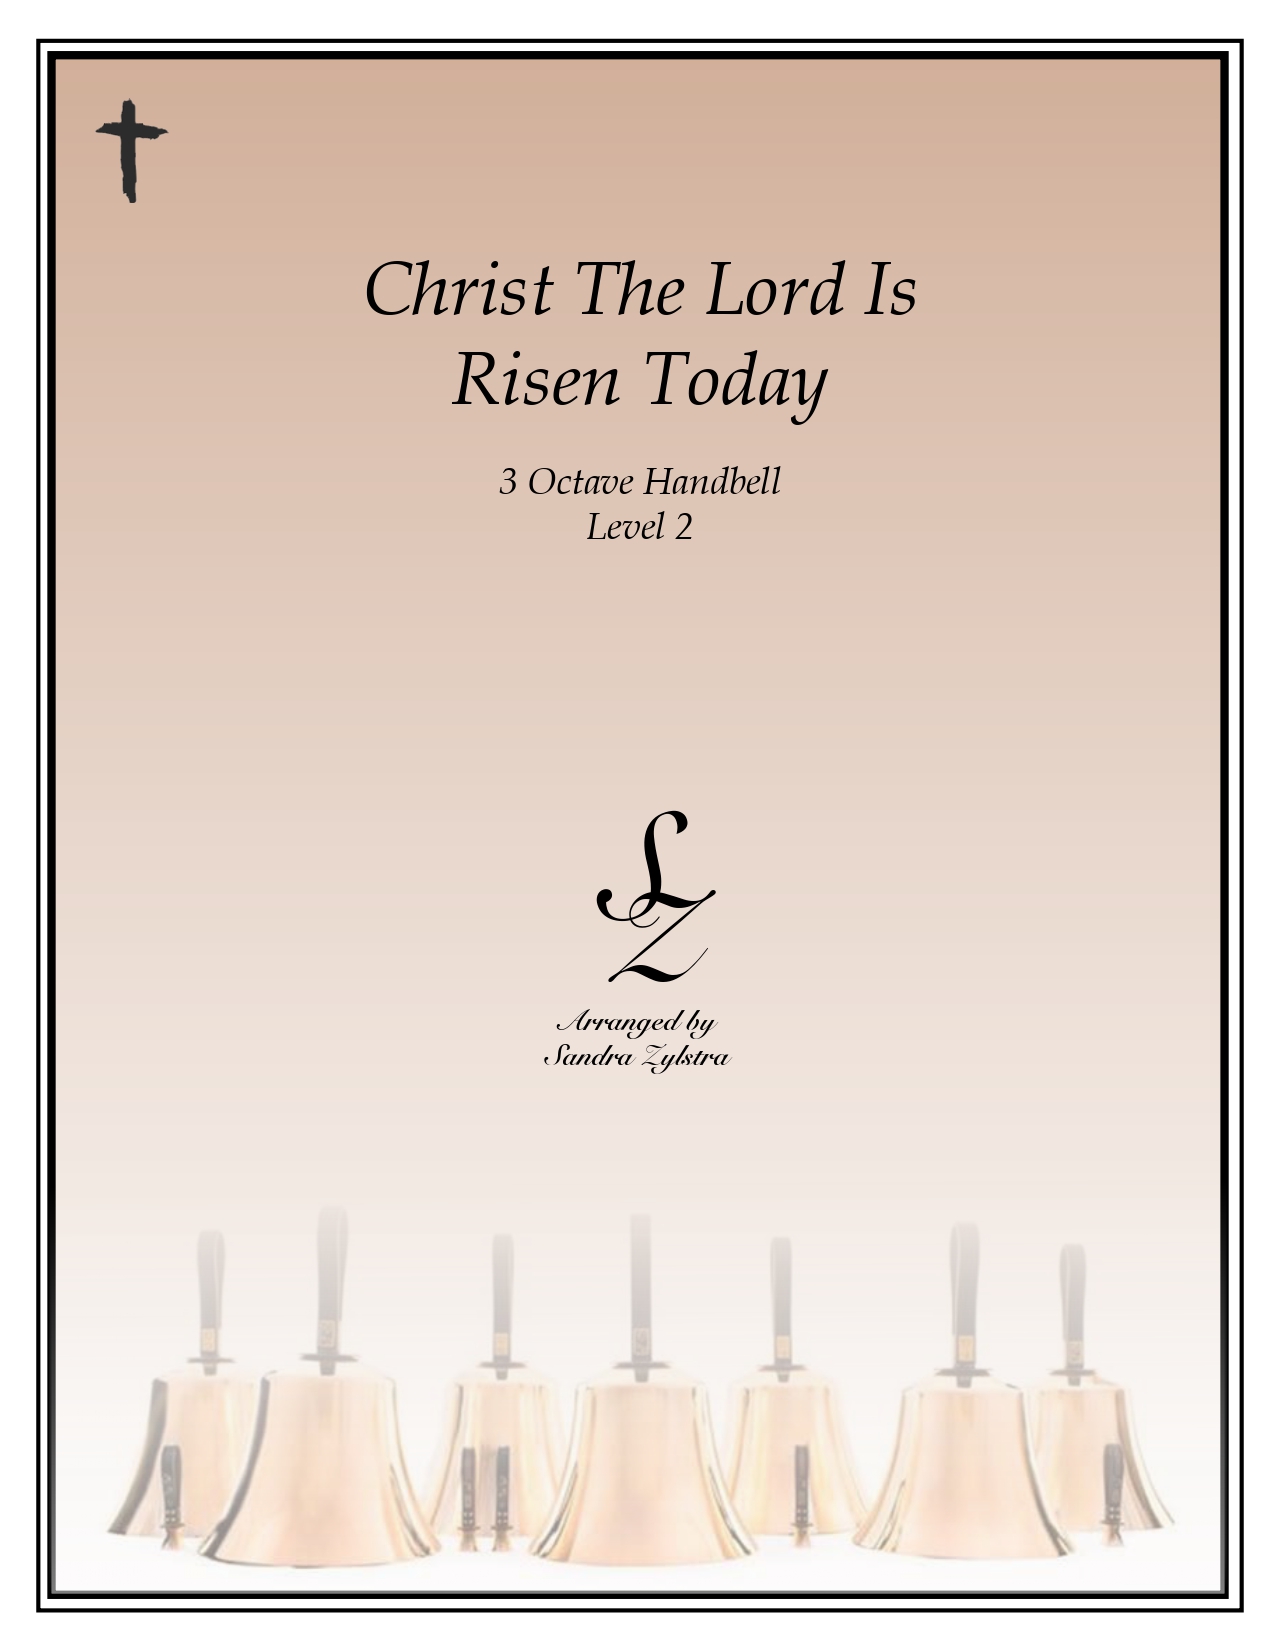 Christ The Lord Is Risen Today handbells cover page 00011